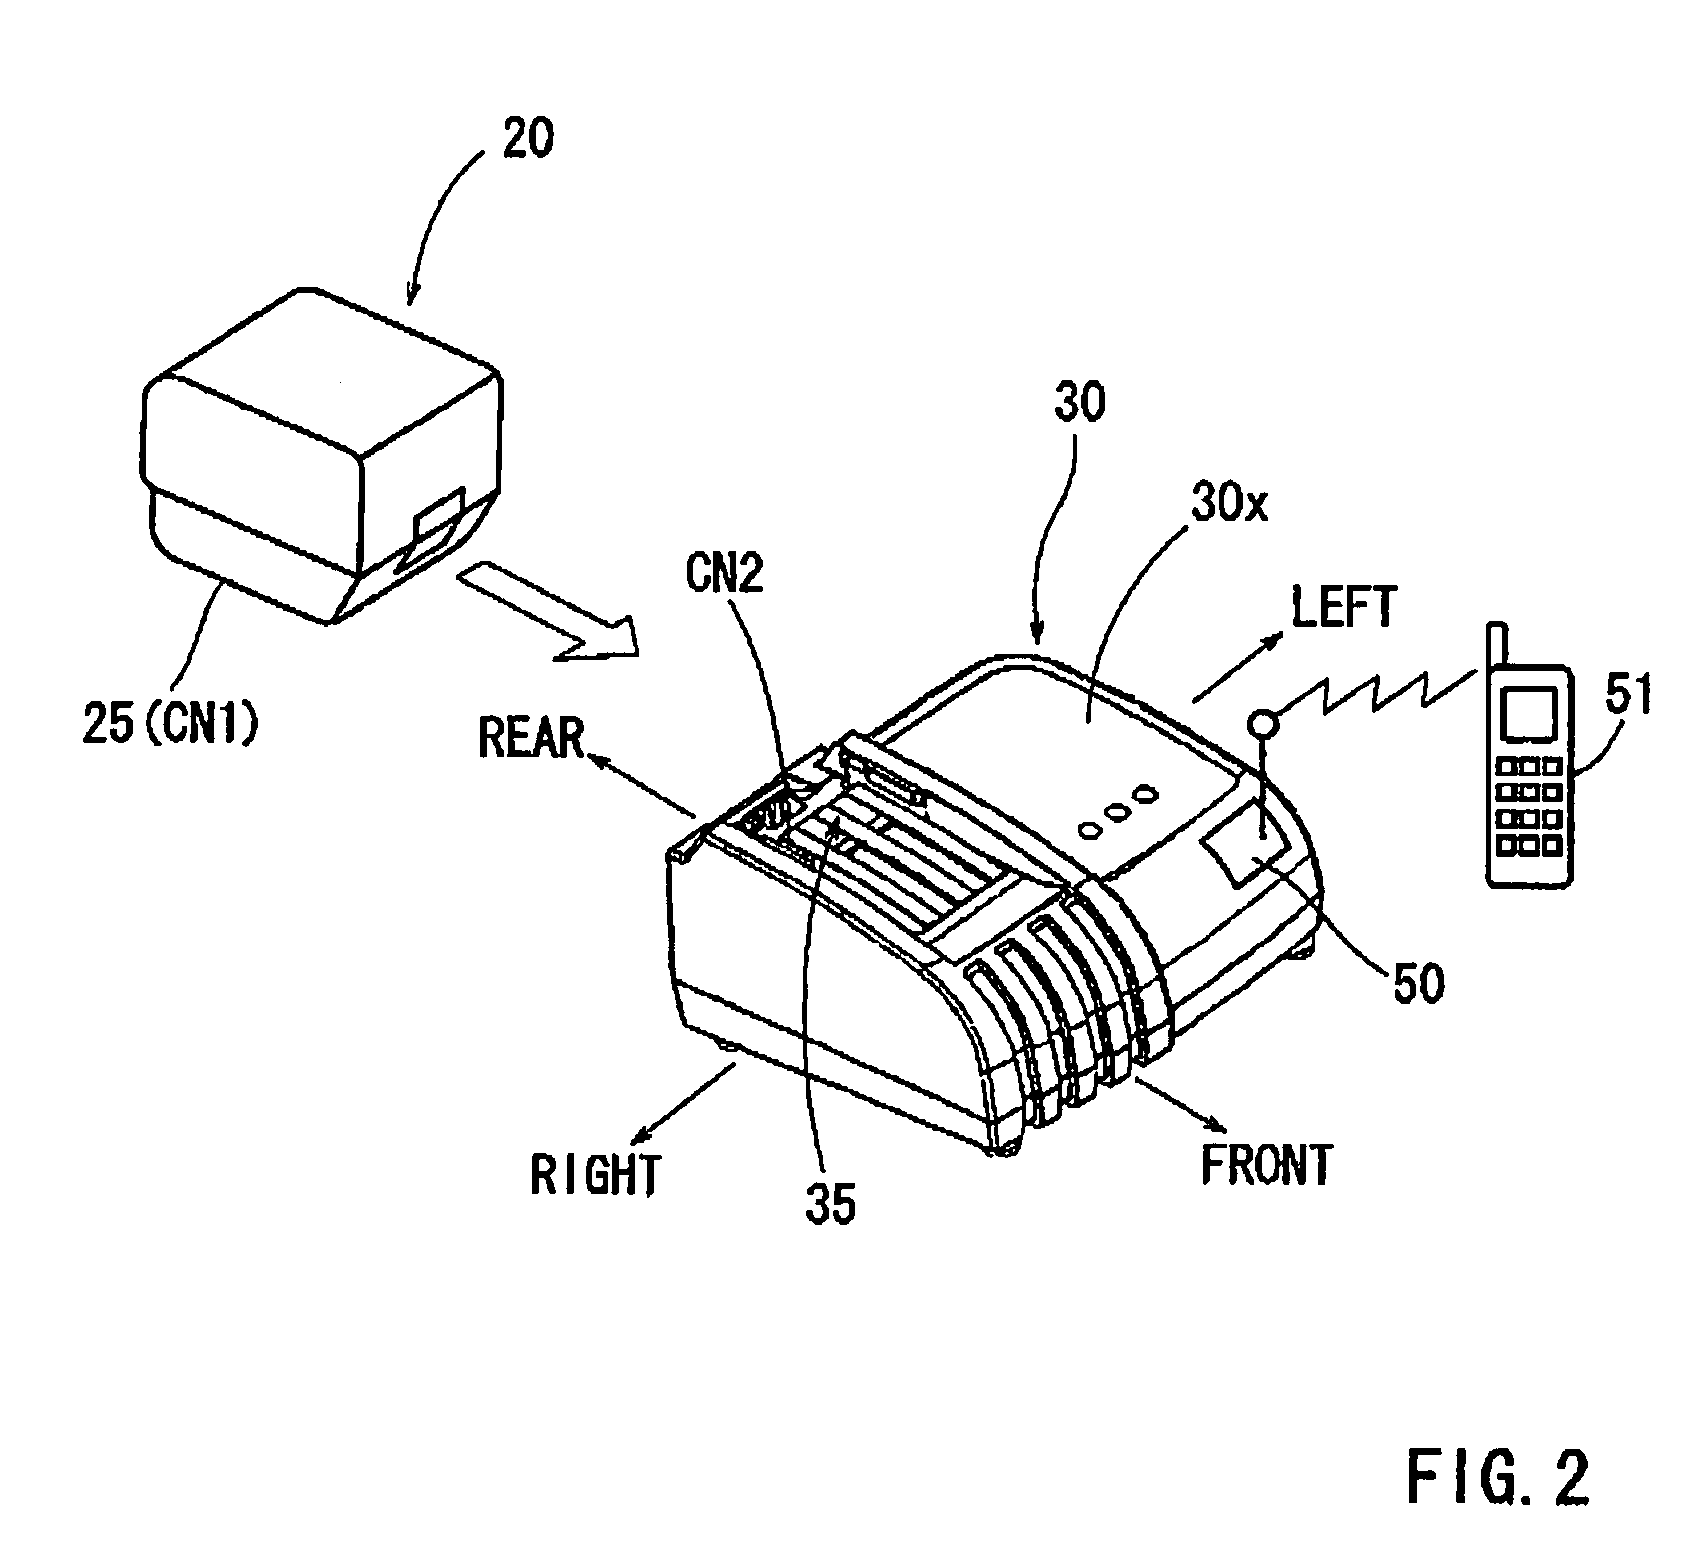 Battery charging systems